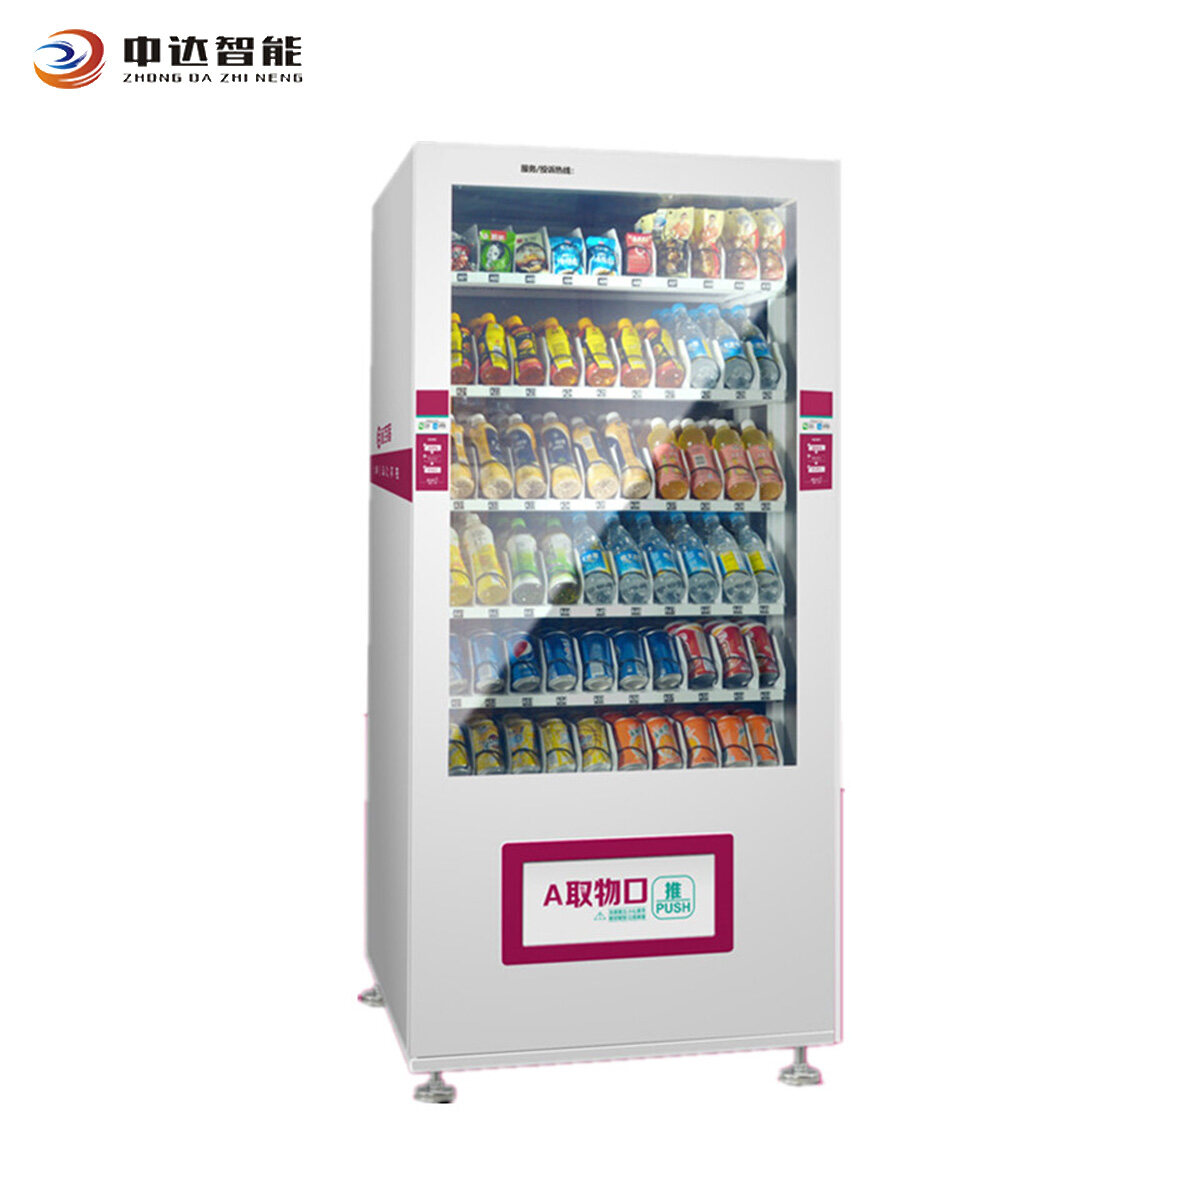 Wholesale snack food vending machines,China refrigerated snack vending machines,mechanical snack vending machine Manufacturer,low calorie vending machine snacks For Sale